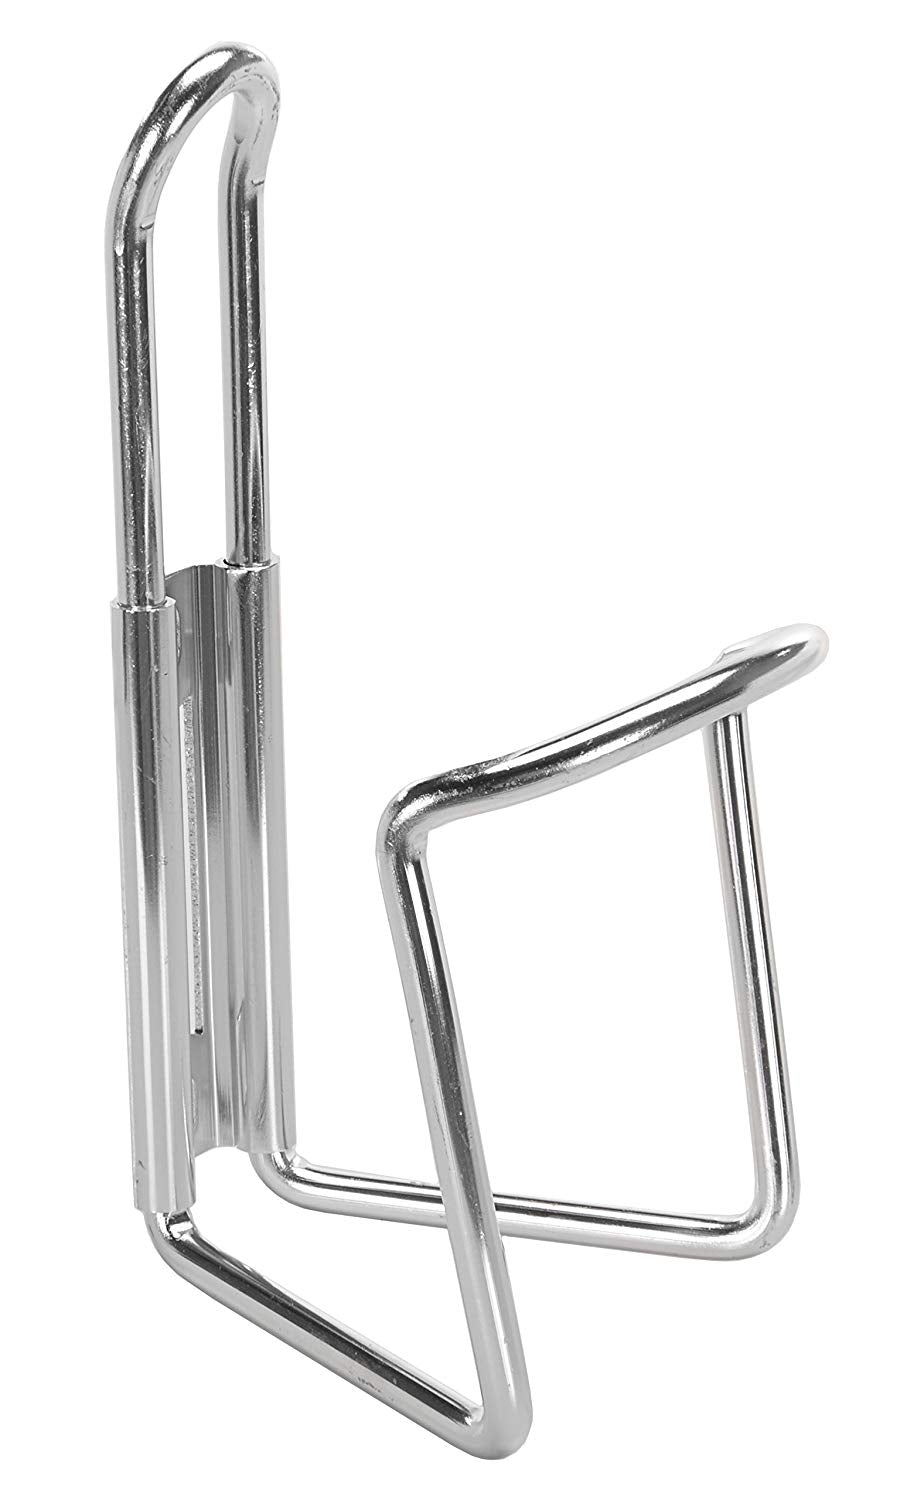 Capstone 67514 Water Bottle Cage, Alloy, Silver